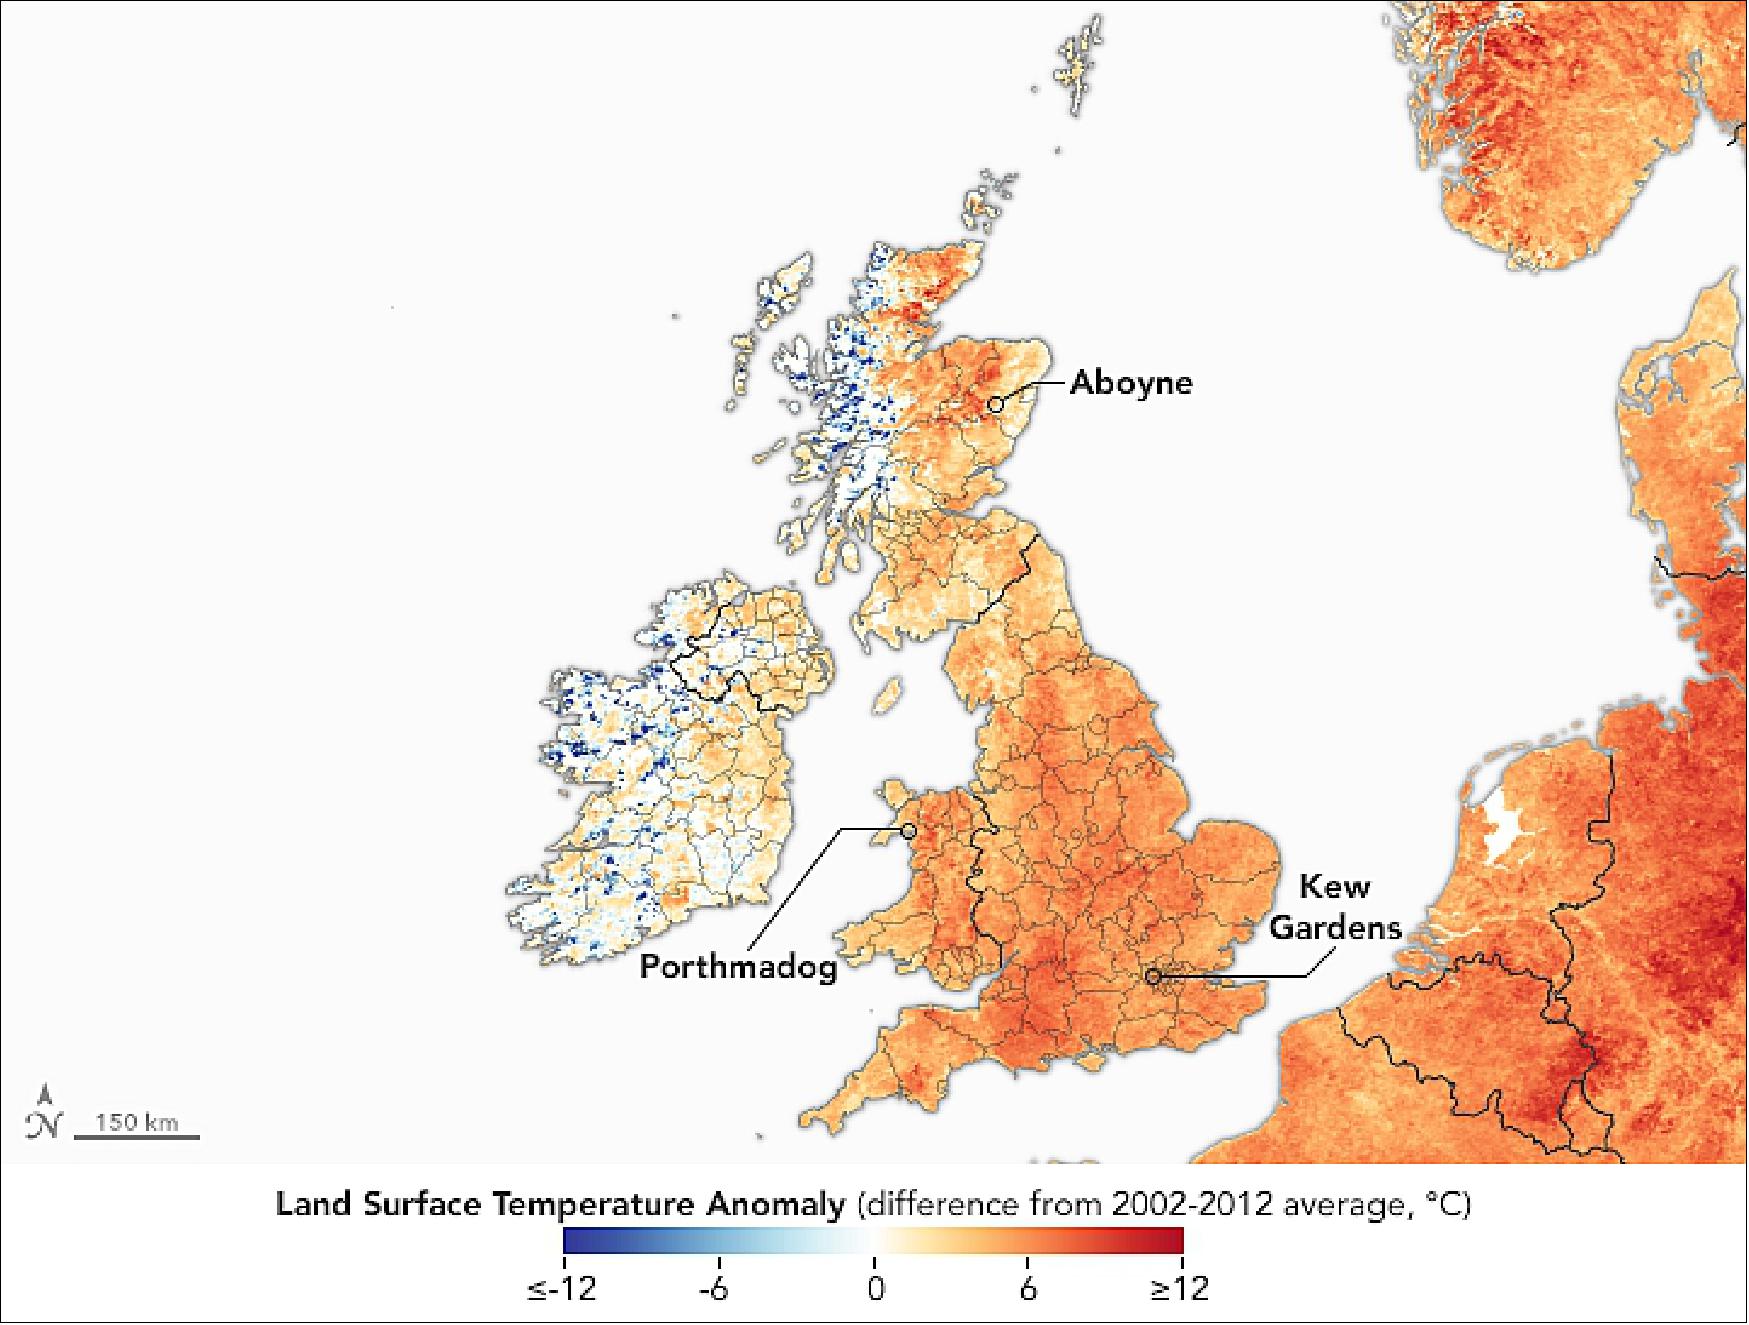 Figure 46: The maps of Figures 46 and 47 show land surface temperature anomalies for February 11-25, 2019. Reds and oranges depict areas that were hotter than average for the same two-week period from 2000-2012; blues were colder than average. White pixels were normal, and gray pixels did not have enough data, most likely due to excessive cloud cover. This temperature anomaly map is based on data from the Moderate Resolution Imaging Spectroradiometer (MODIS) on NASA’s Terra satellite (image credit: NASA Earth Observatory, image by Joshua Stevens, using data from the Level 1 and Atmospheres Active Distribution System (LAADS) and Land Atmosphere Near real-time Capability for EOS (LANCE), story by Kasha Patel)